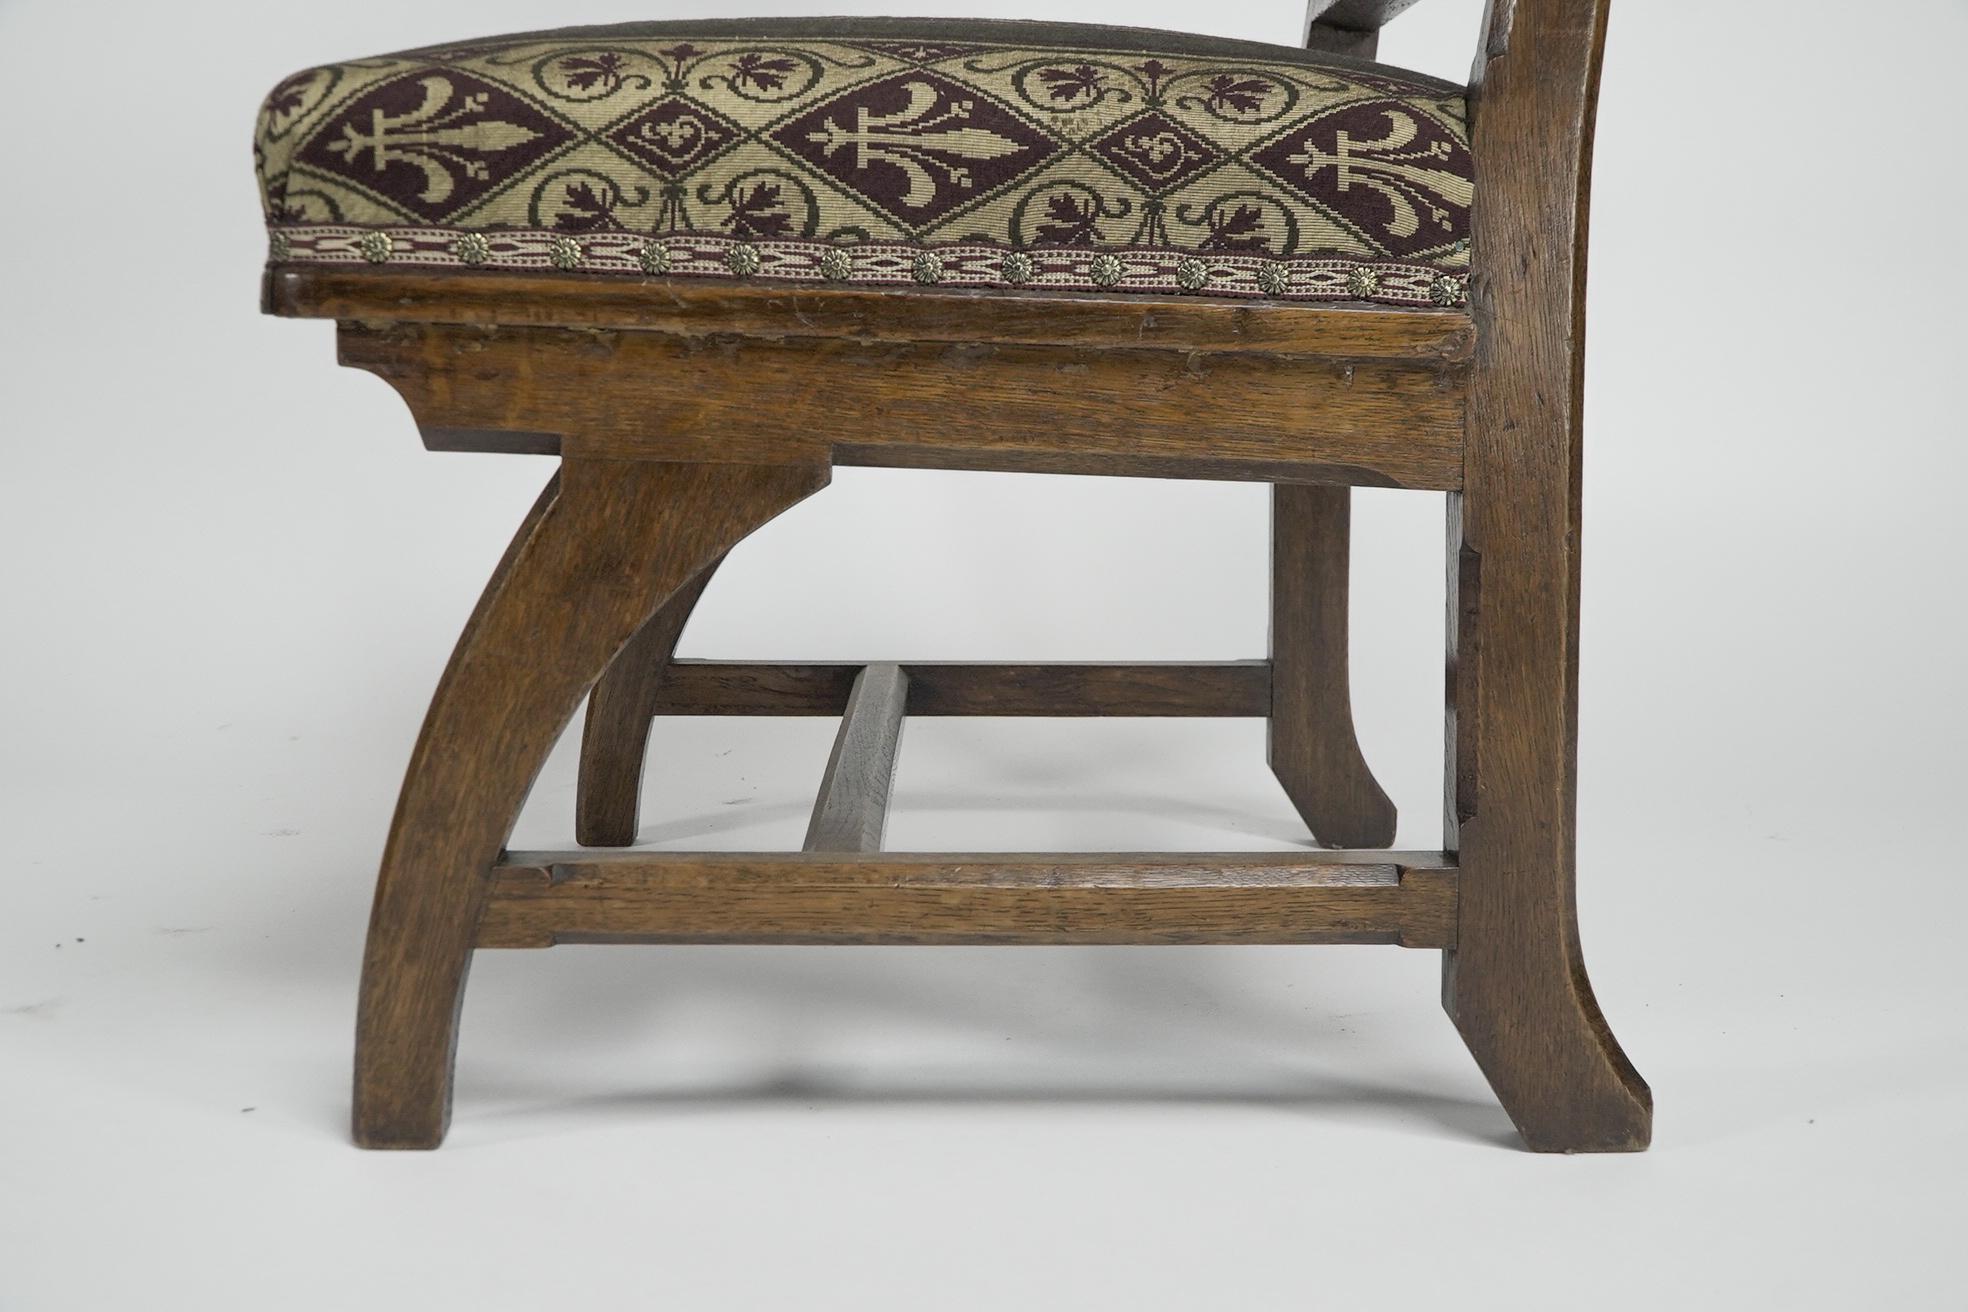 E W Pugin attri. A Gothic Revival oak duet chair with a wider than usual seat. For Sale 10